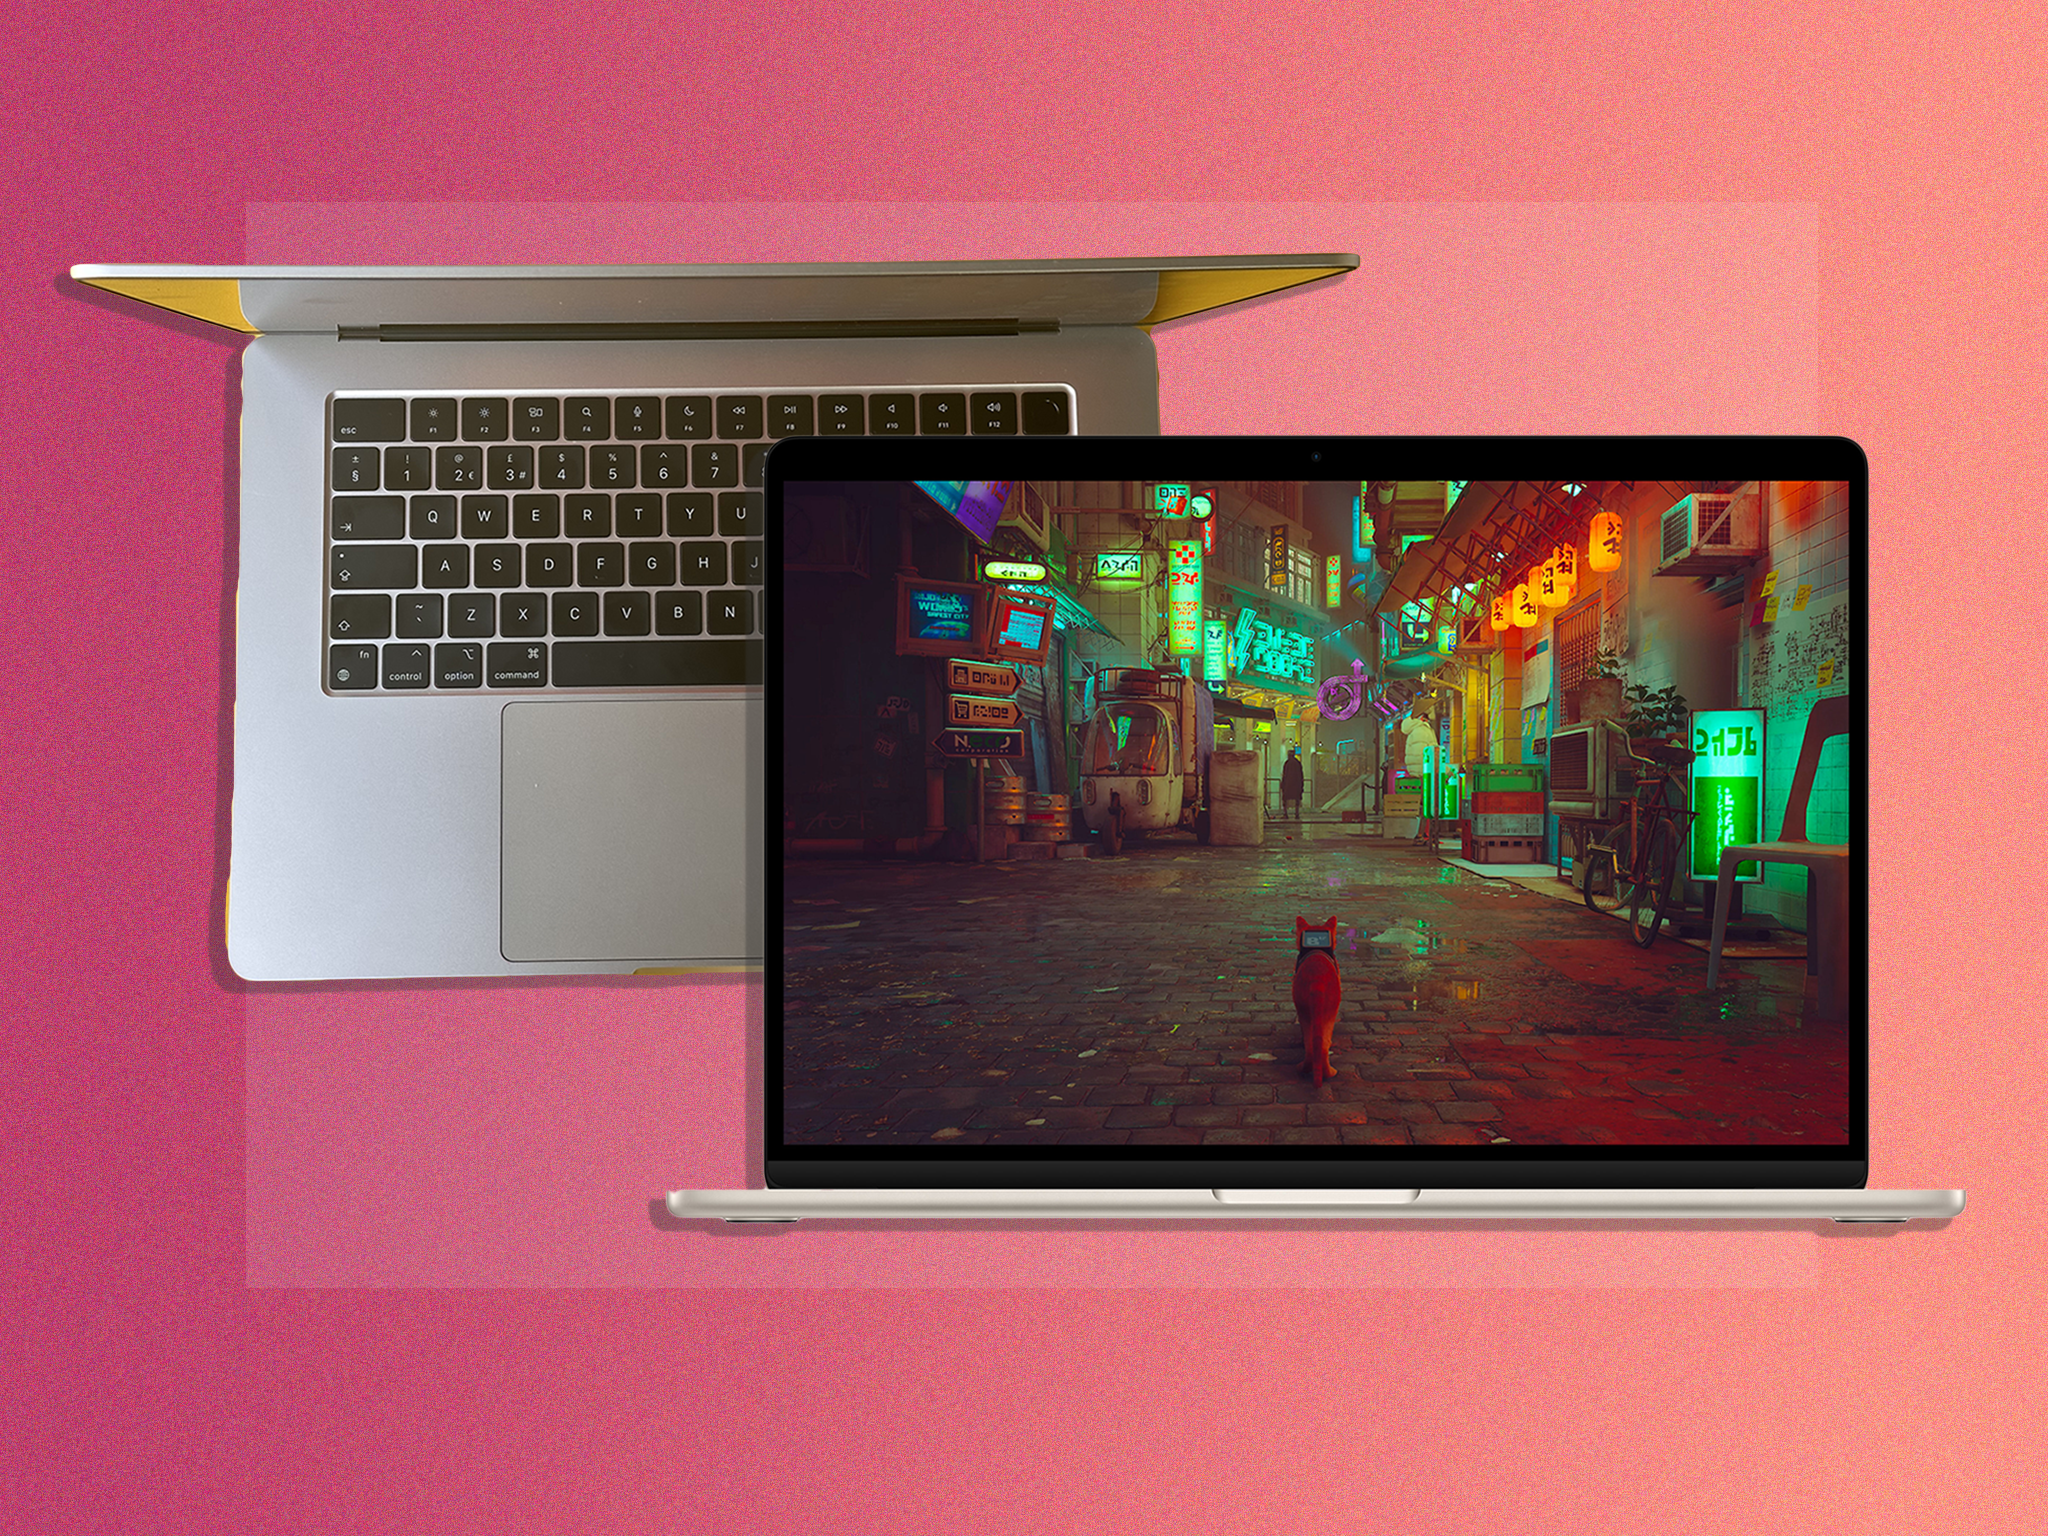 Apple MacBook air 15-inch review: It's bigger, but is it better